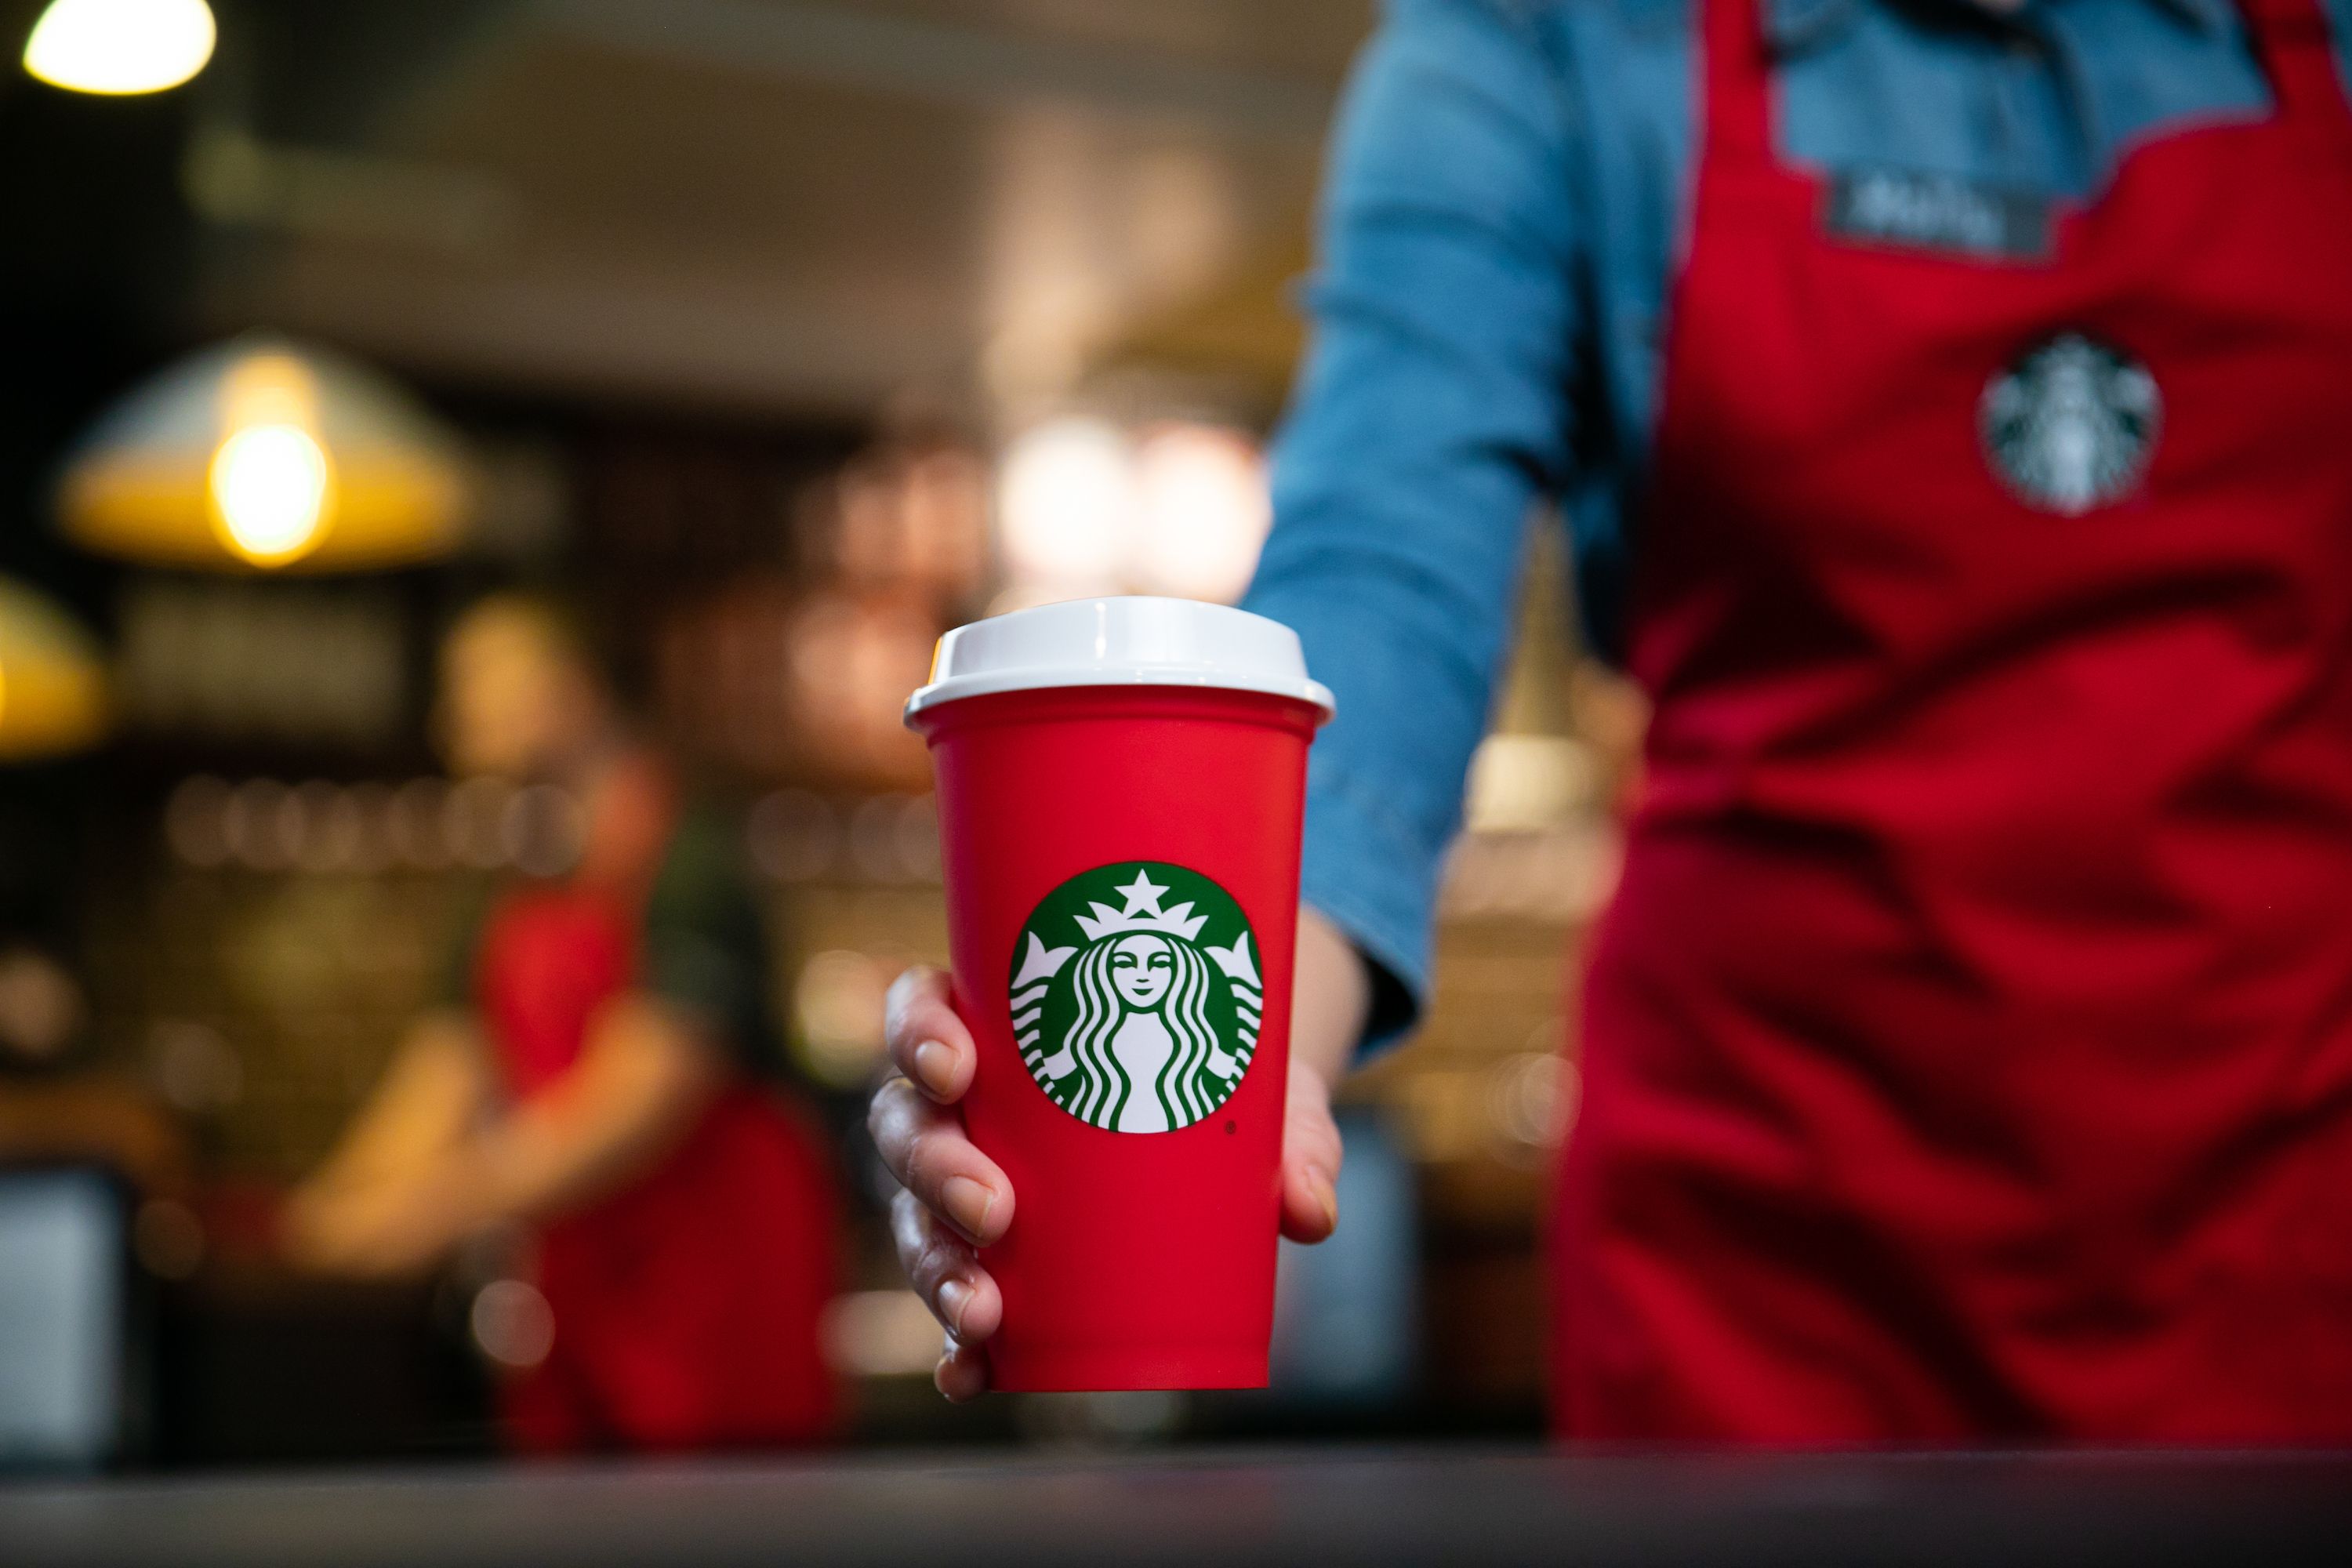 Our gift to you: Starbucks offers free collectible holiday cups on